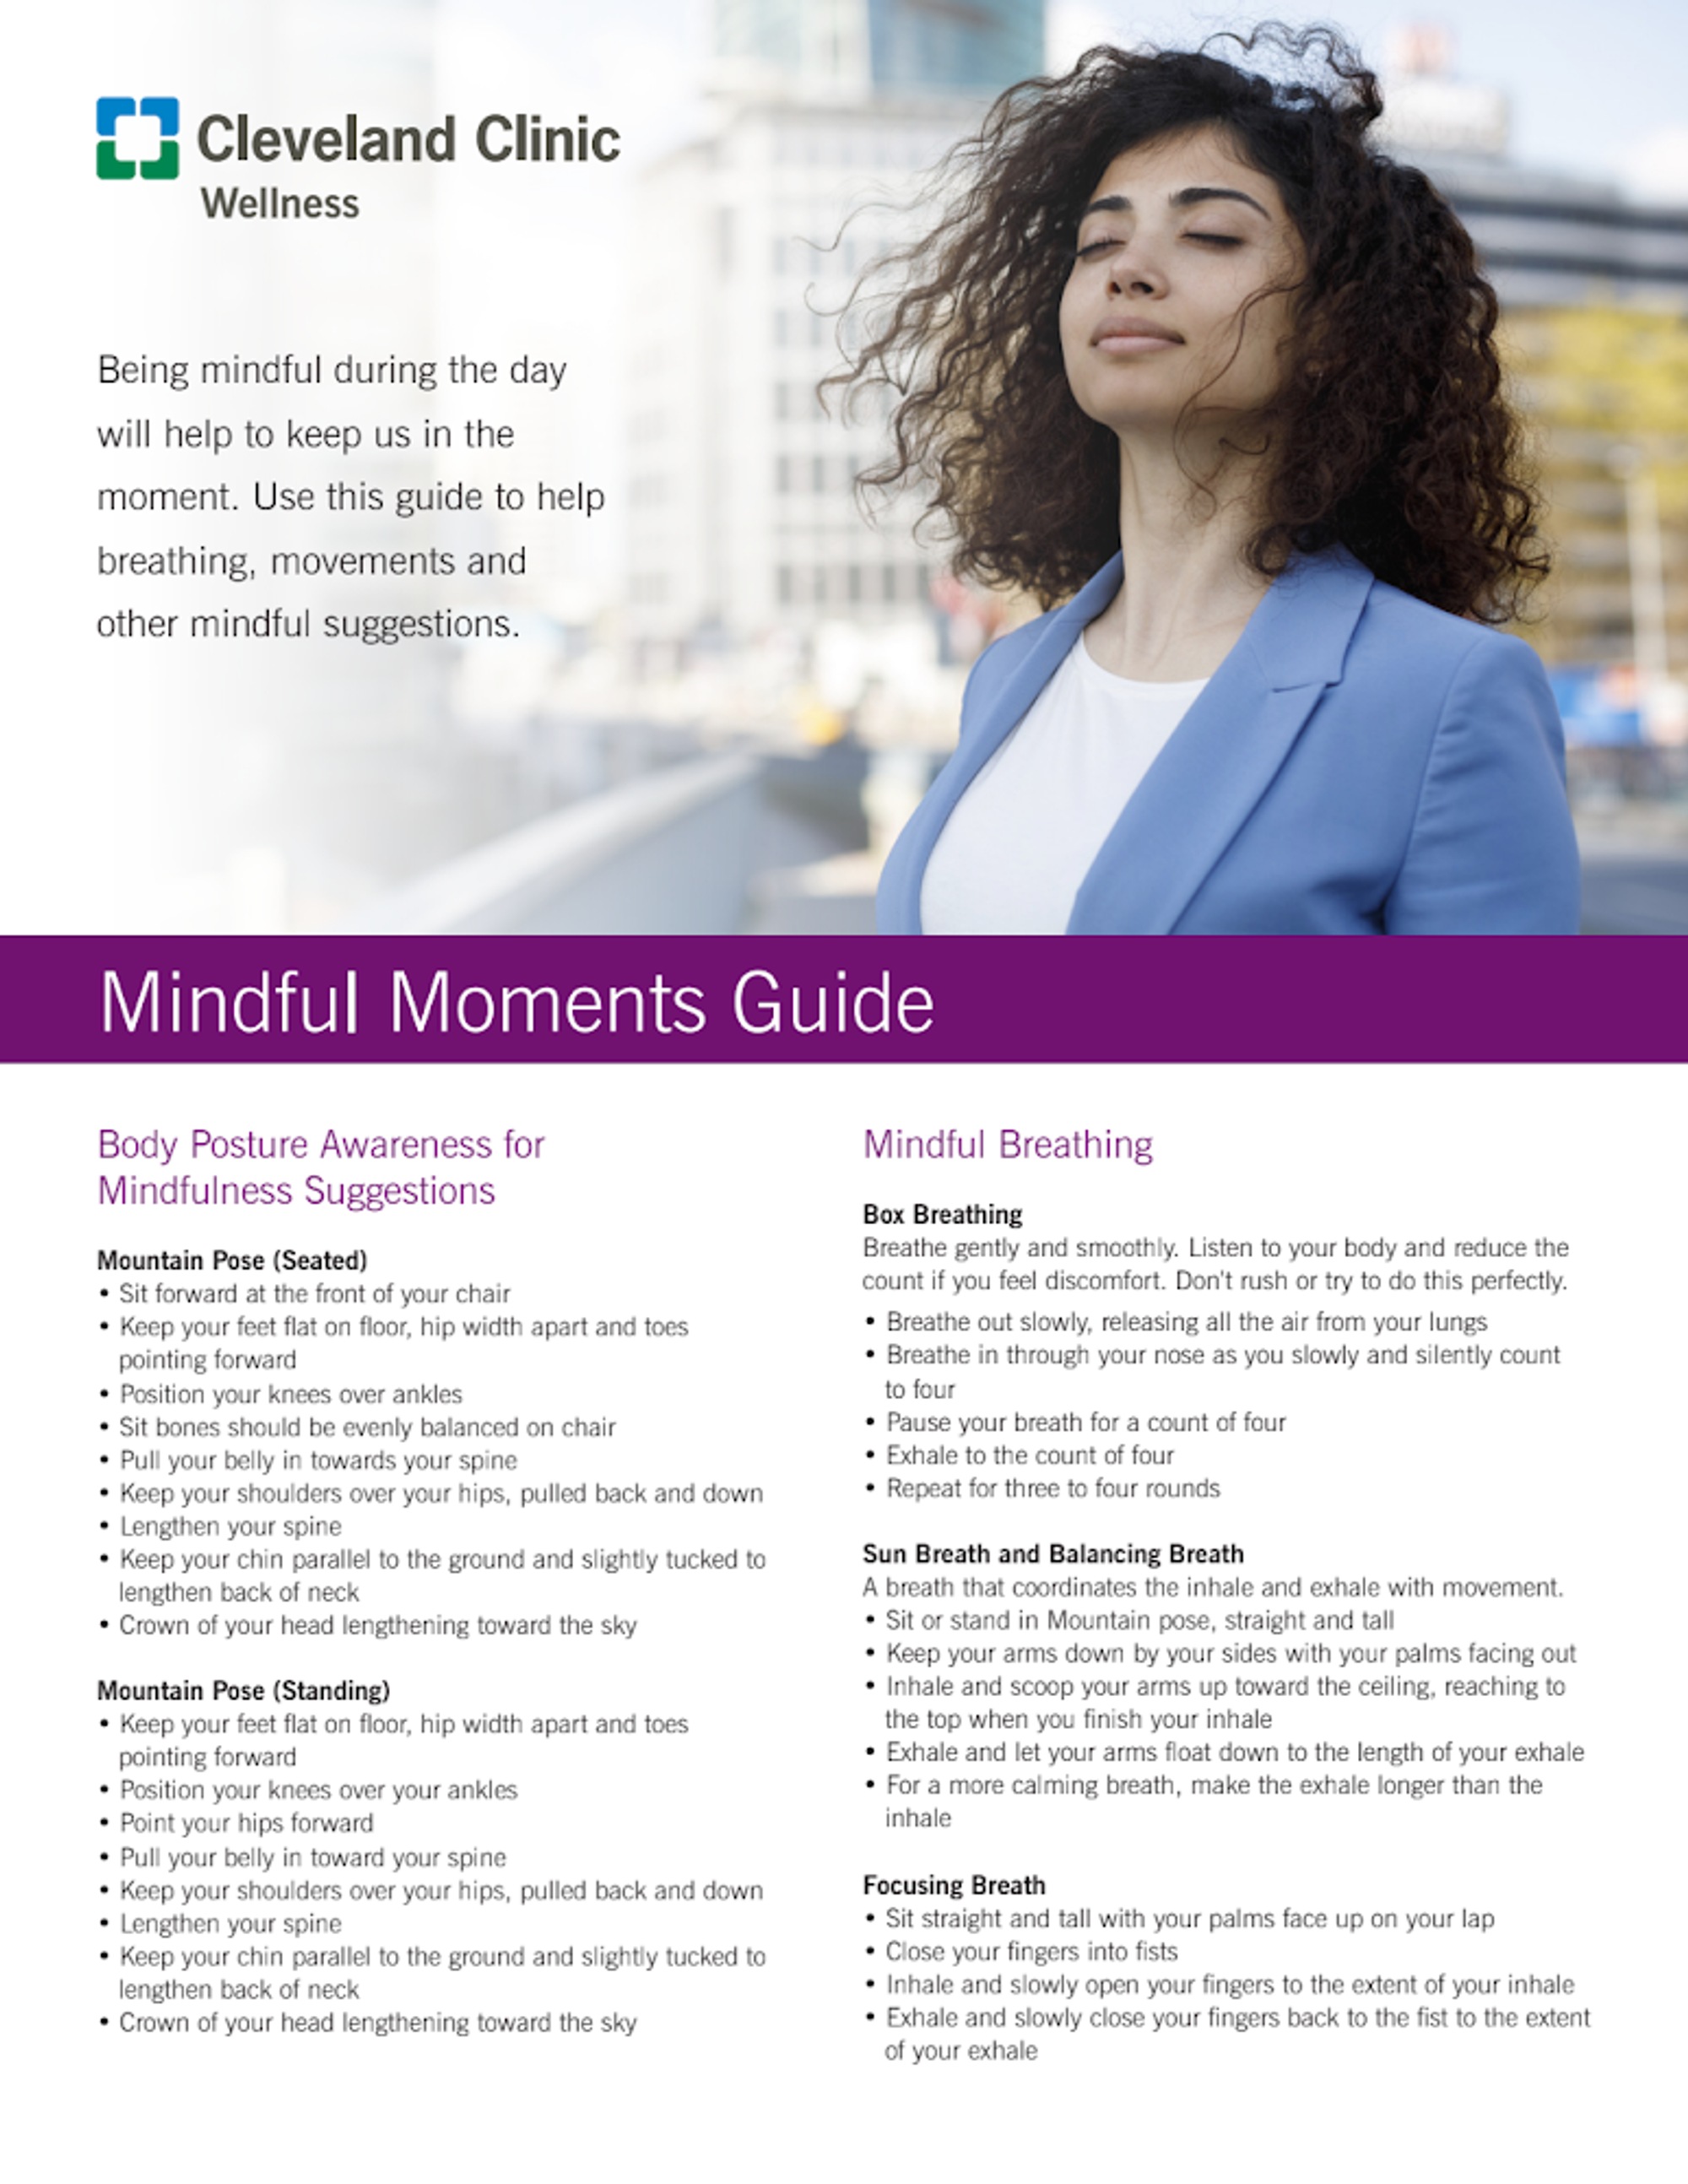 Mindful Moments Guide.pdf